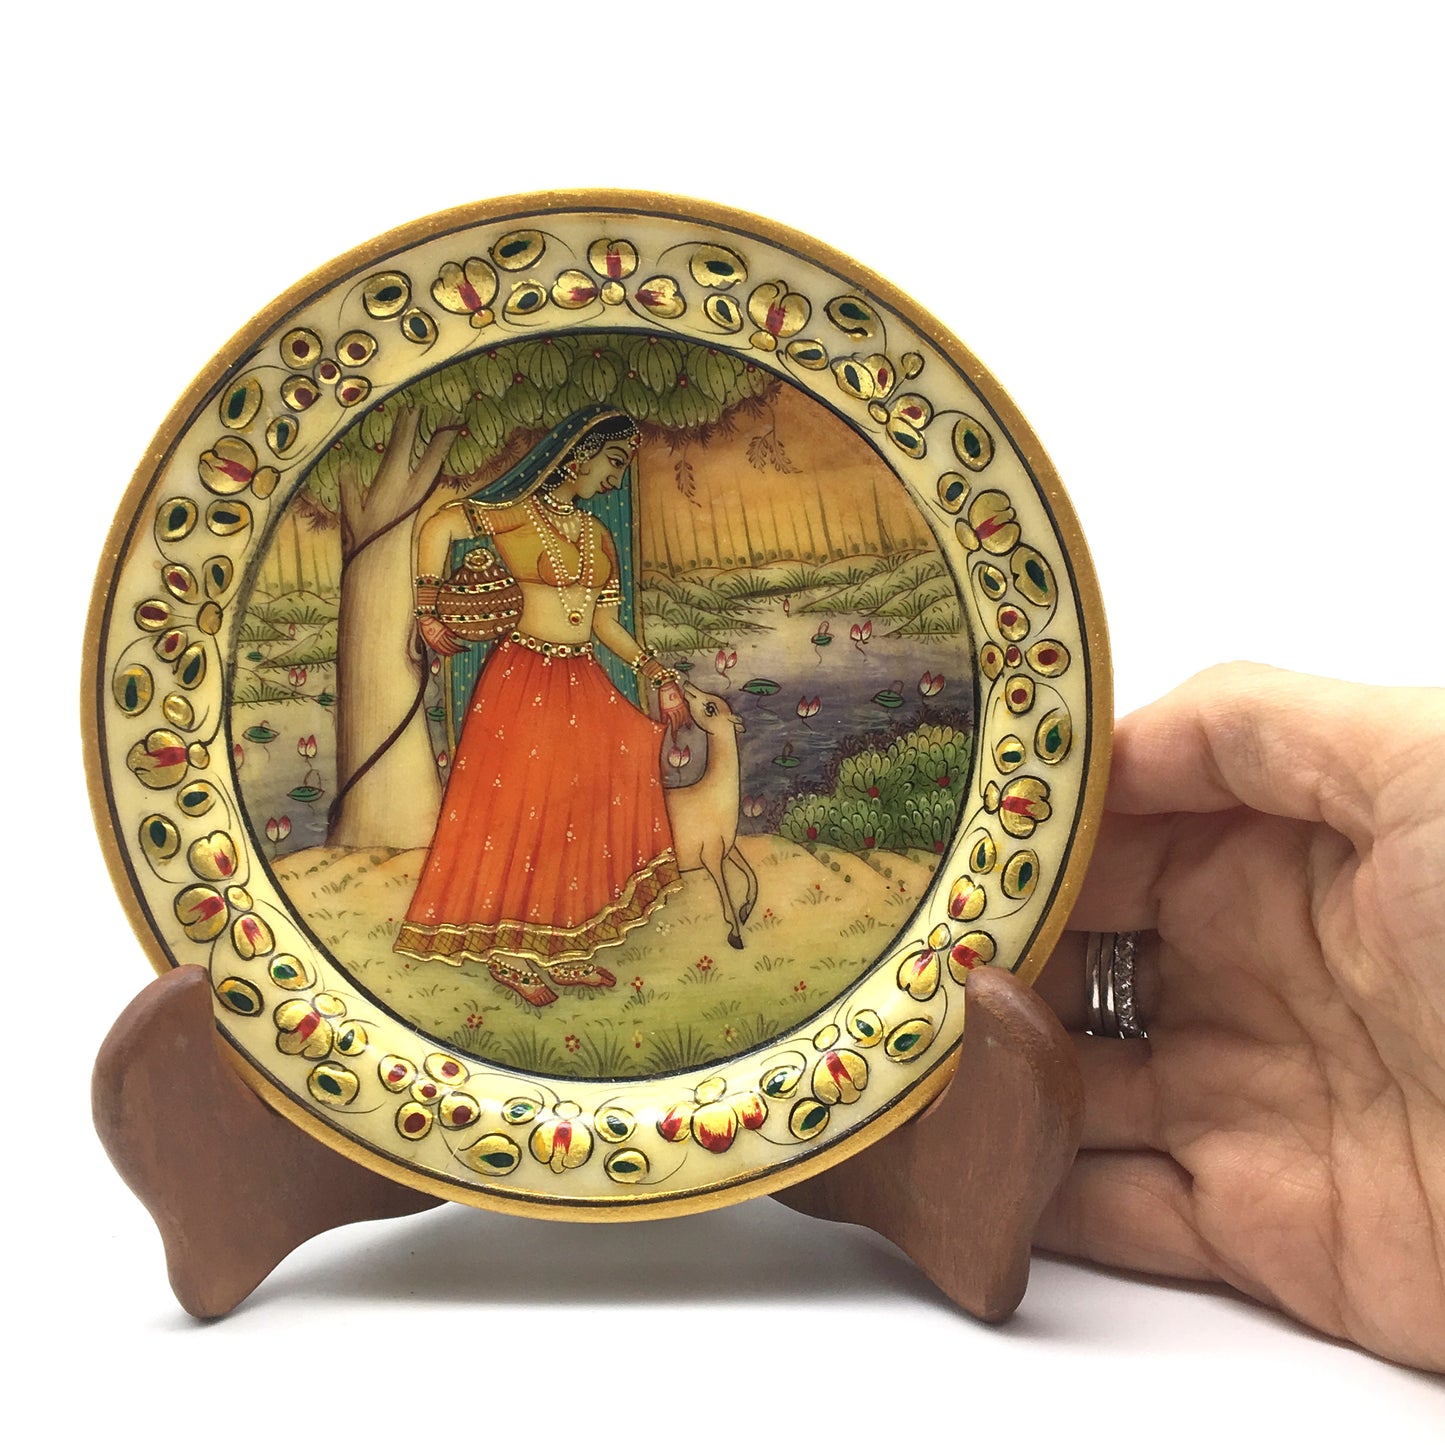 Handcrafted Collectible India Decorative Marble Plate with Wood Stand -Gold Trim - Montecinos Ethnic